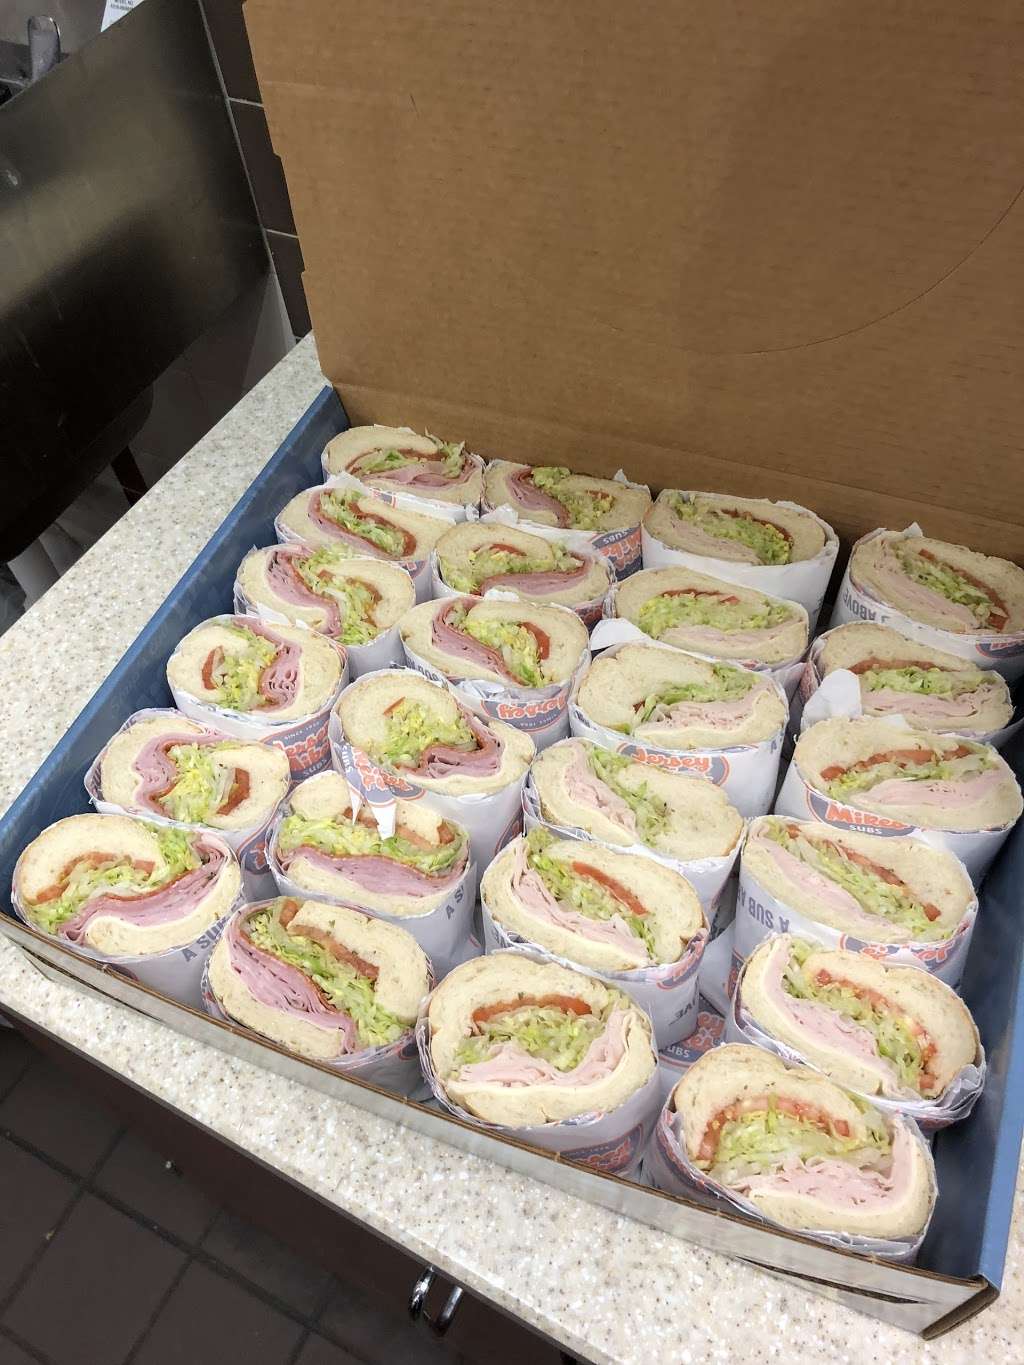 Jersey Mikes Subs | 260 N West End Blvd, Quakertown, PA 18951 | Phone: (267) 347-4191